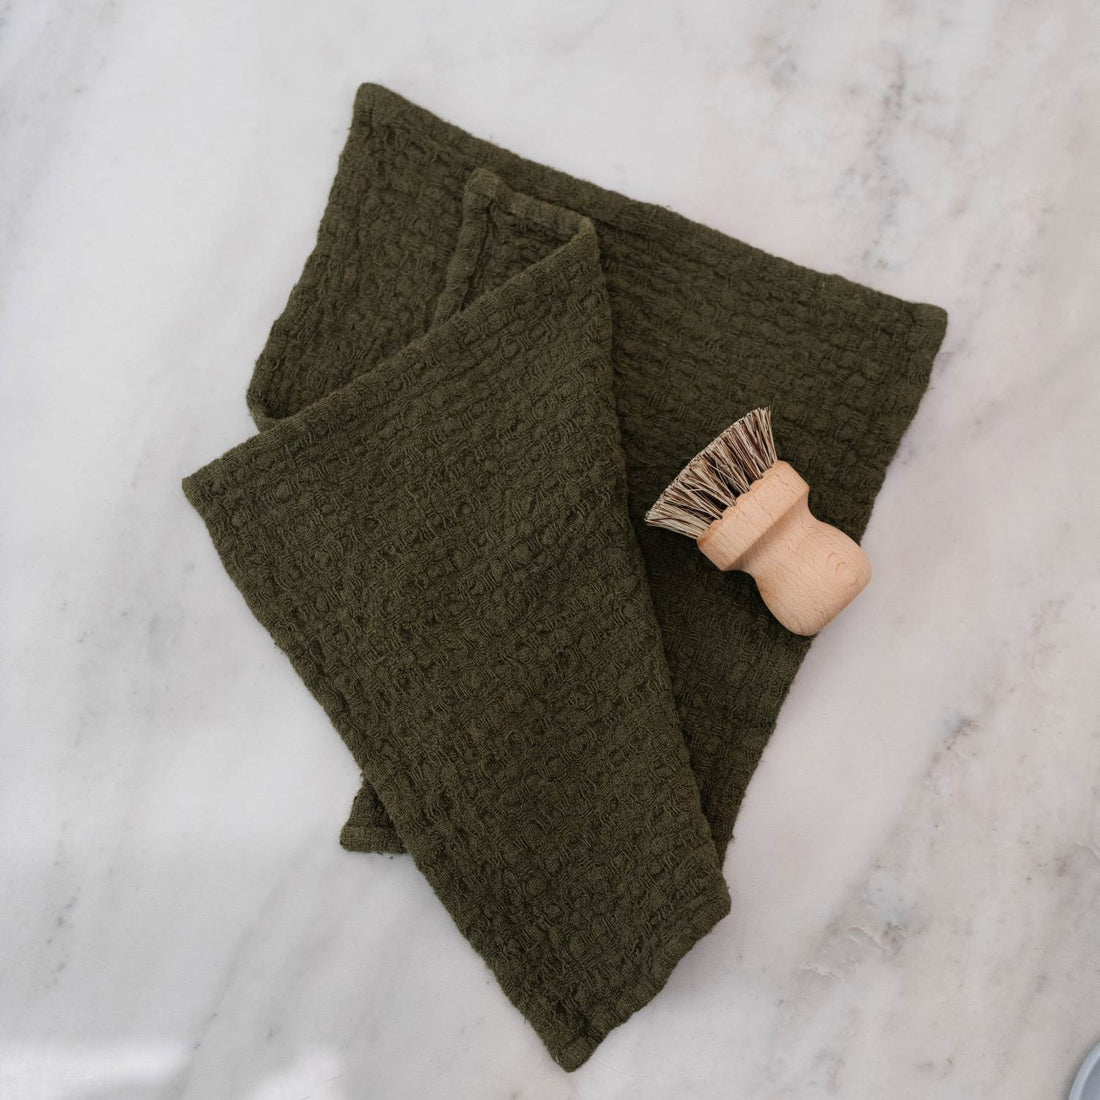 Martini Olive Green Dishcloths (set of two)